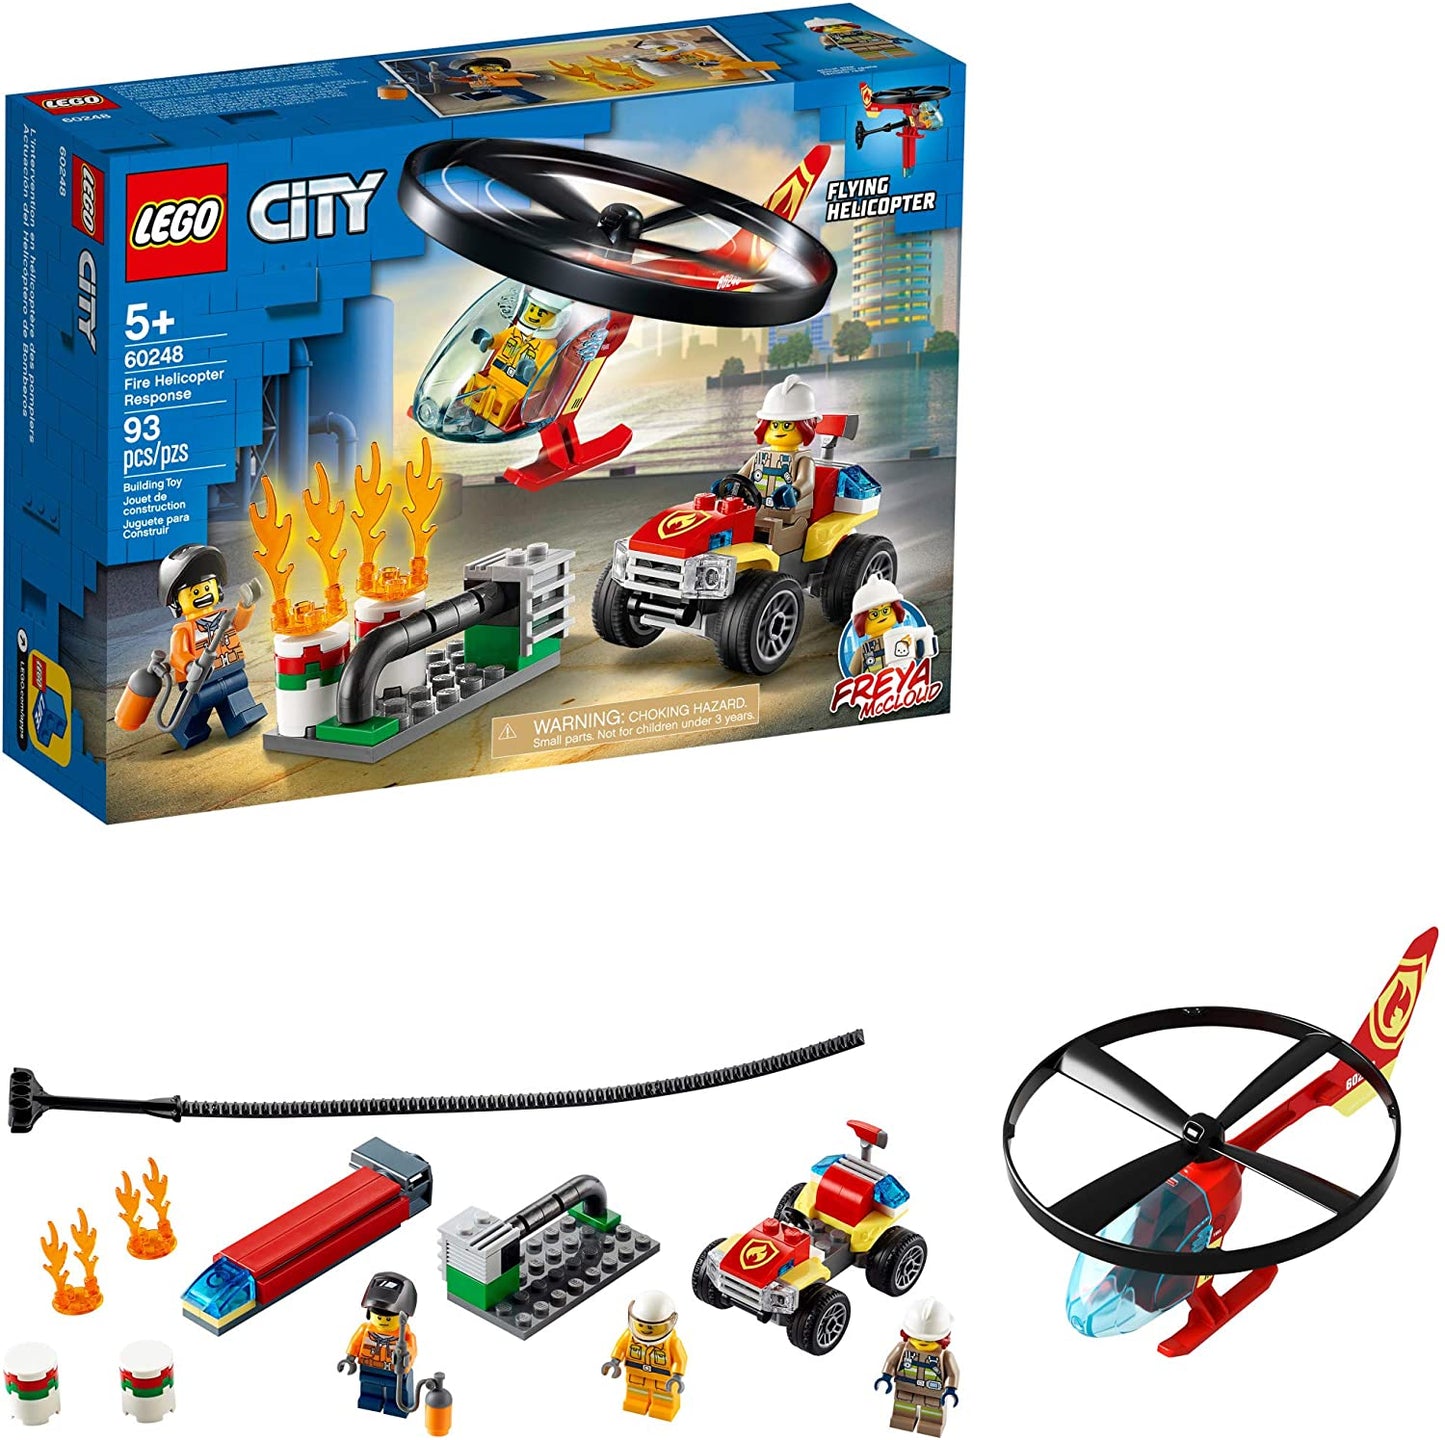 LEGO City - Fire Helicopter Response 60248